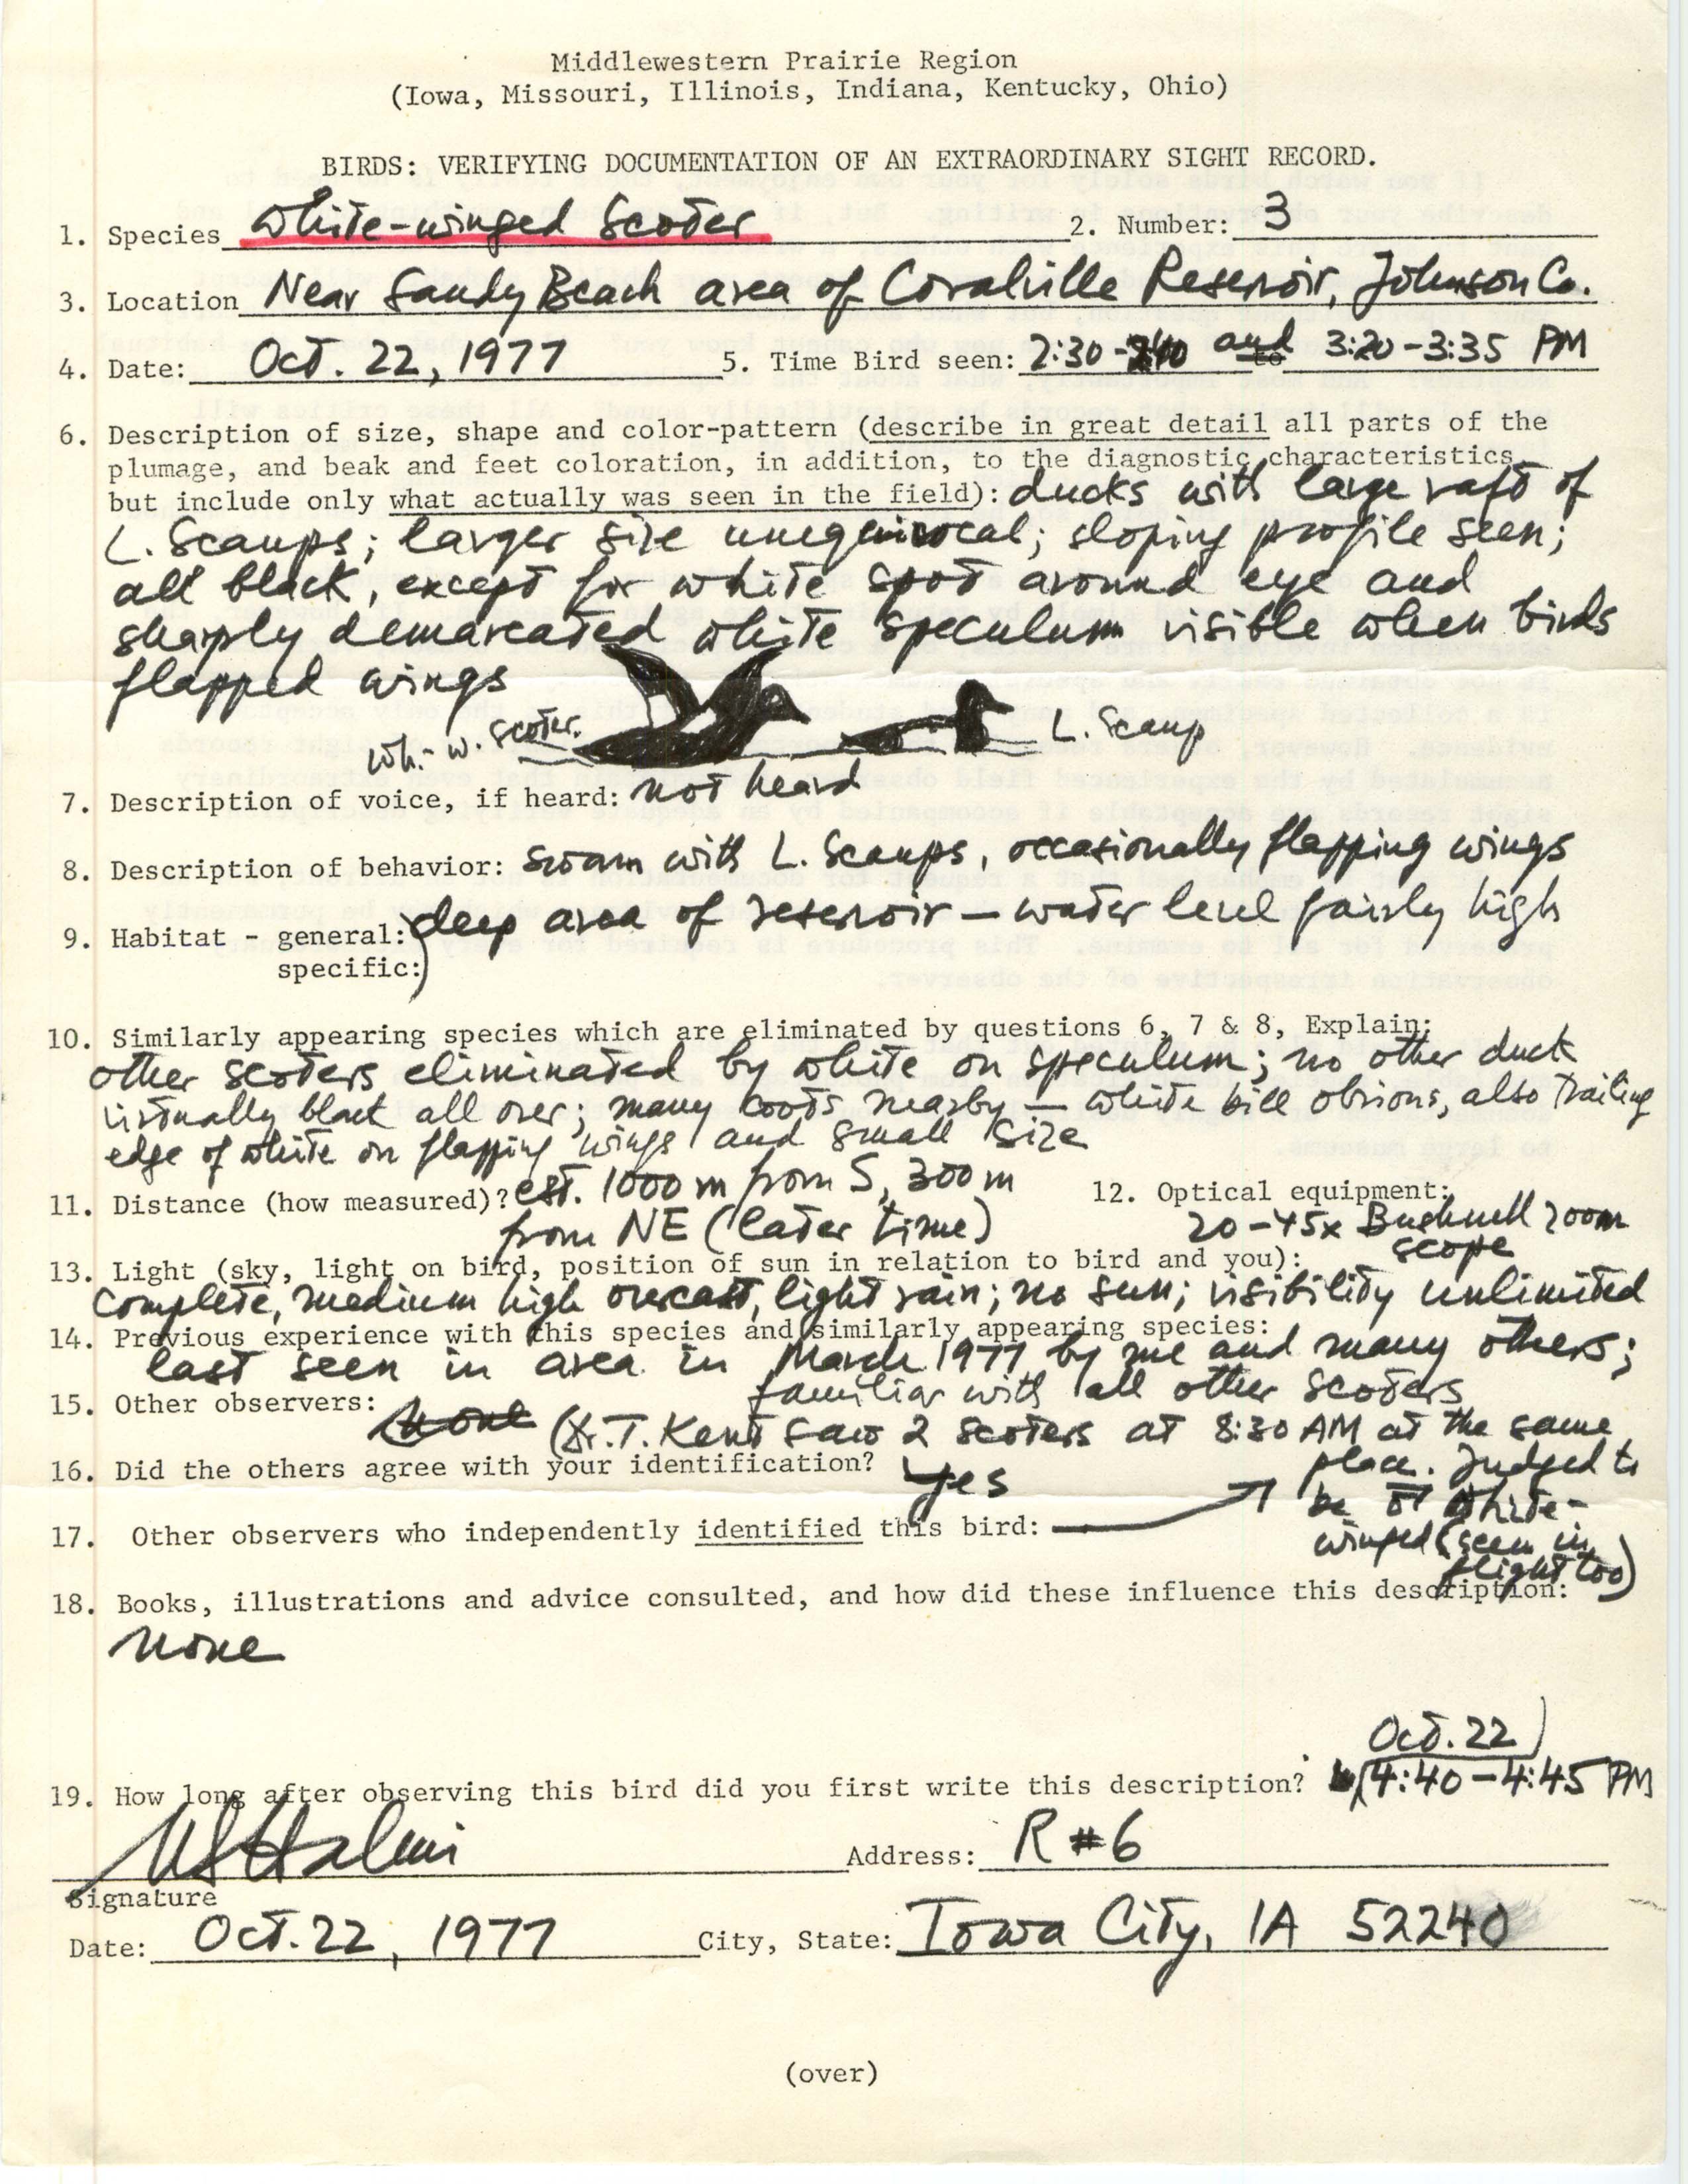 Rare bird documentation form for White-winged Scoter at Coralville Reservoir, 1977